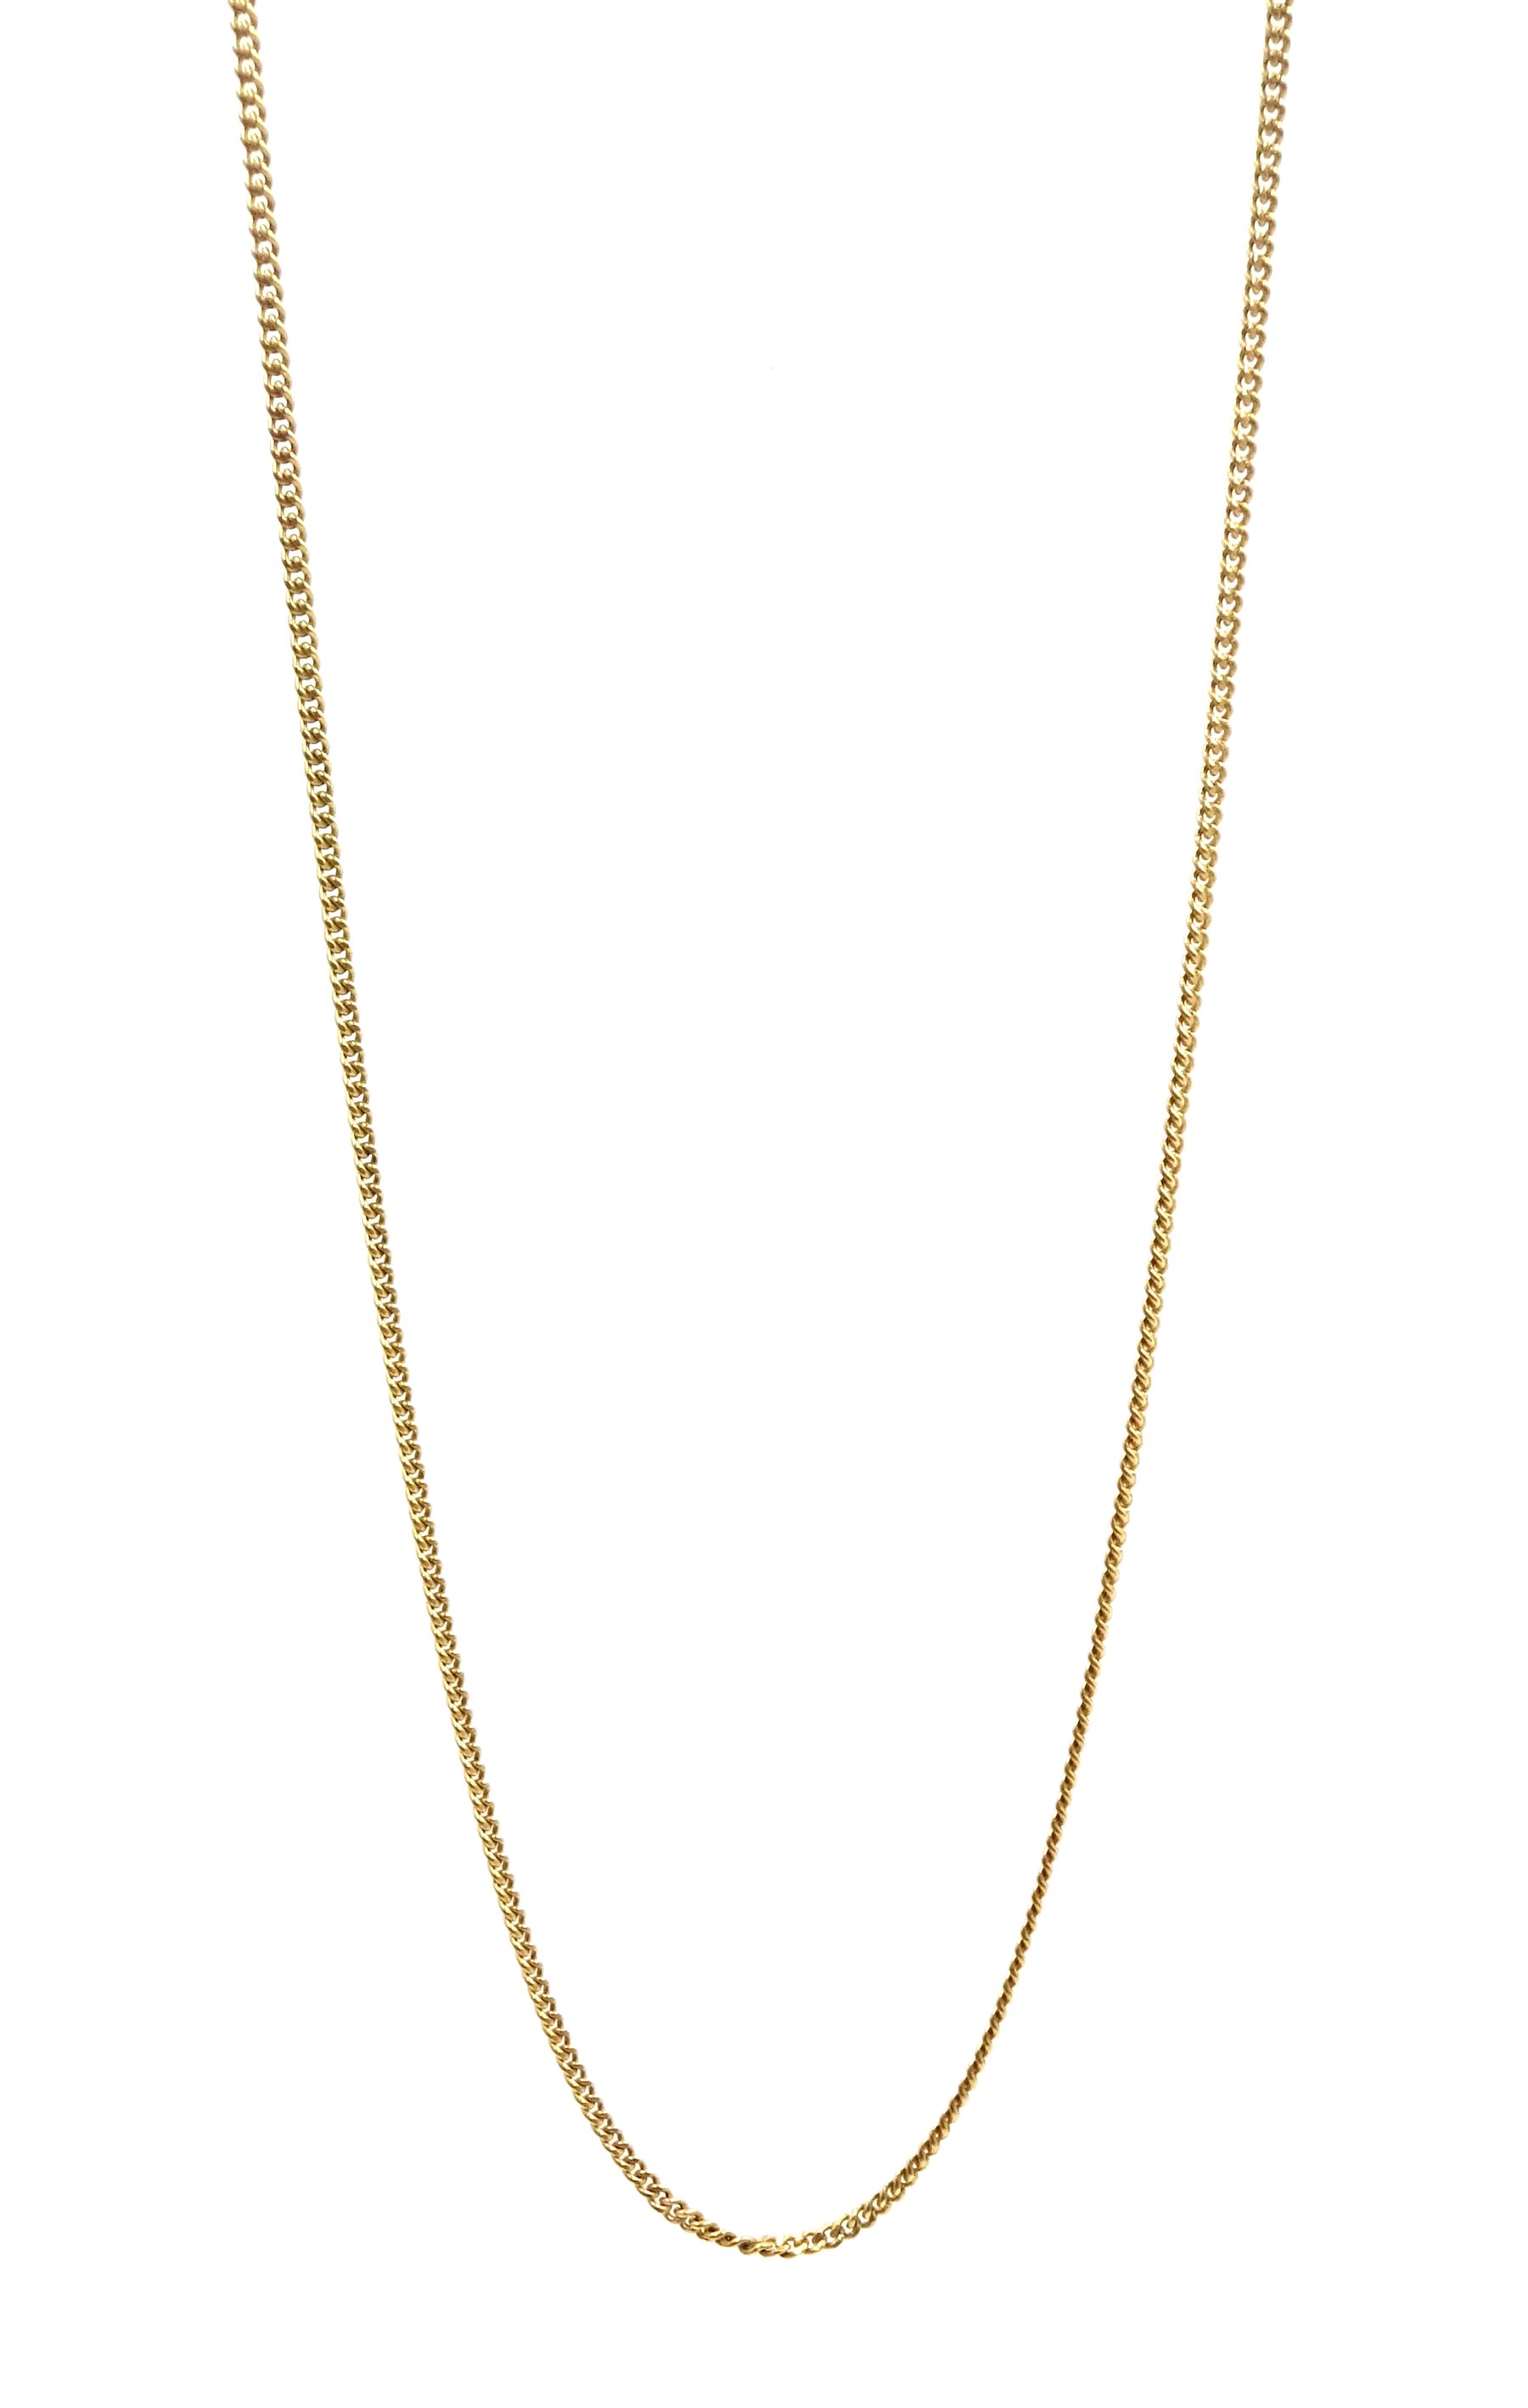 18ct gold chain necklace, stamped 750, approx 5gm